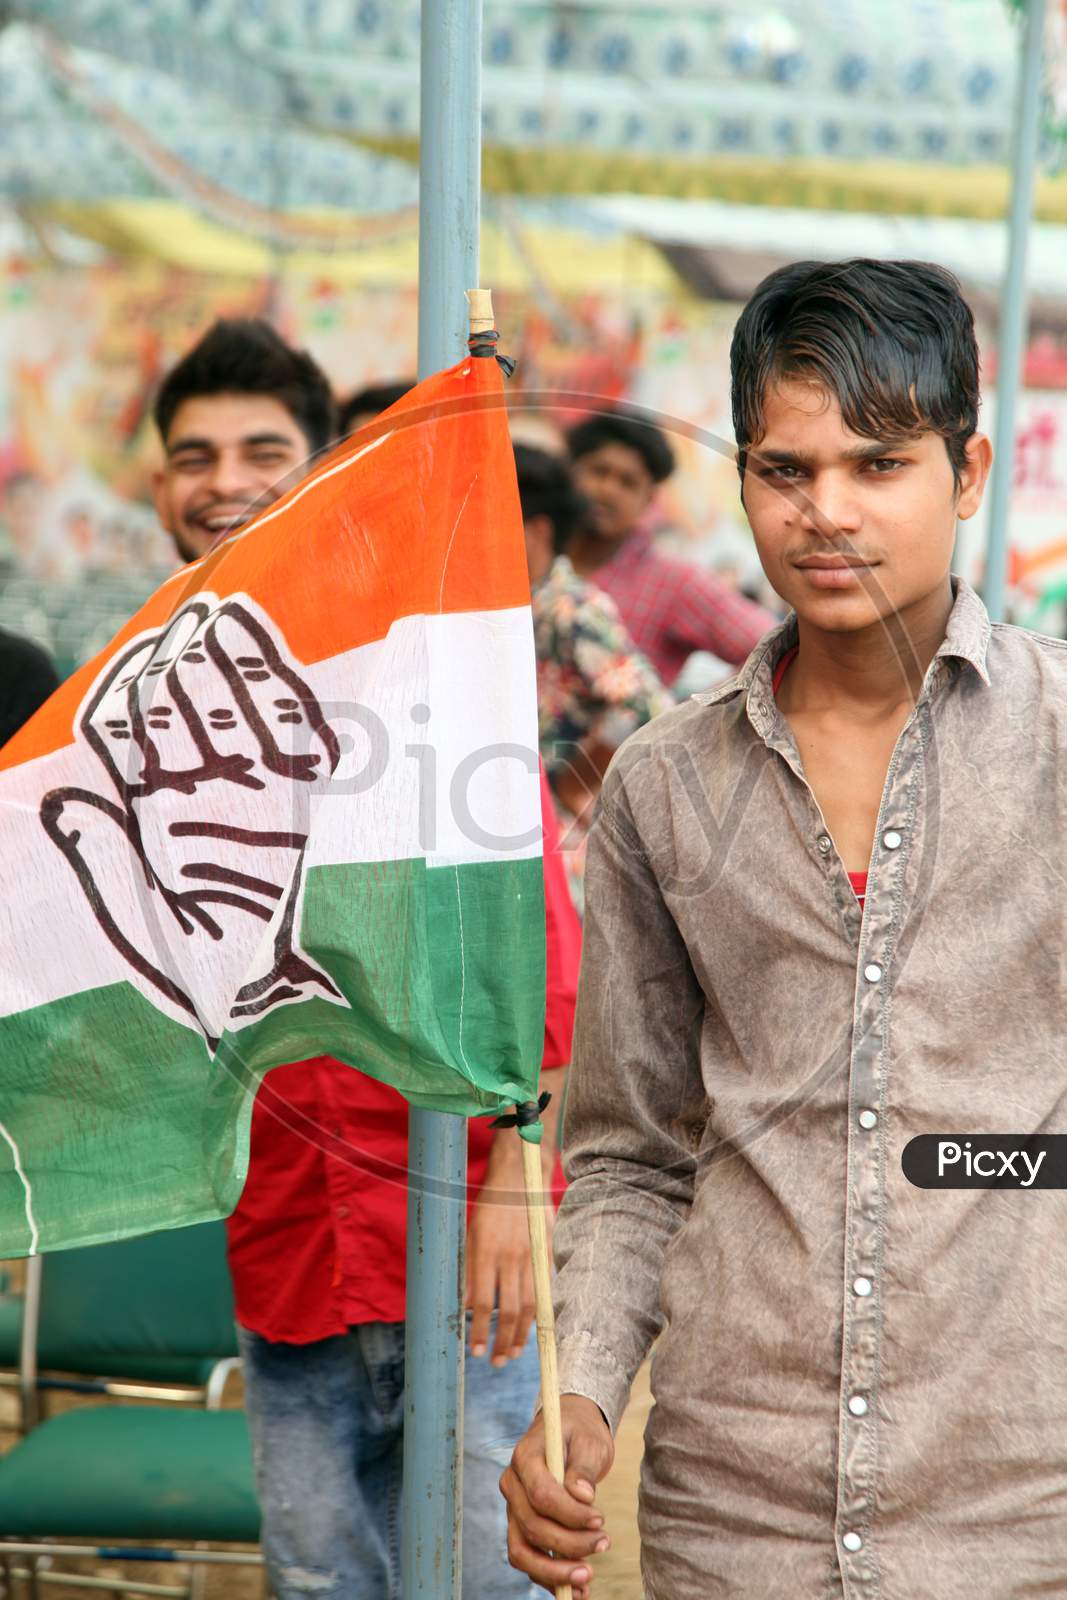 A Young Indian Man with Congress Party Flag